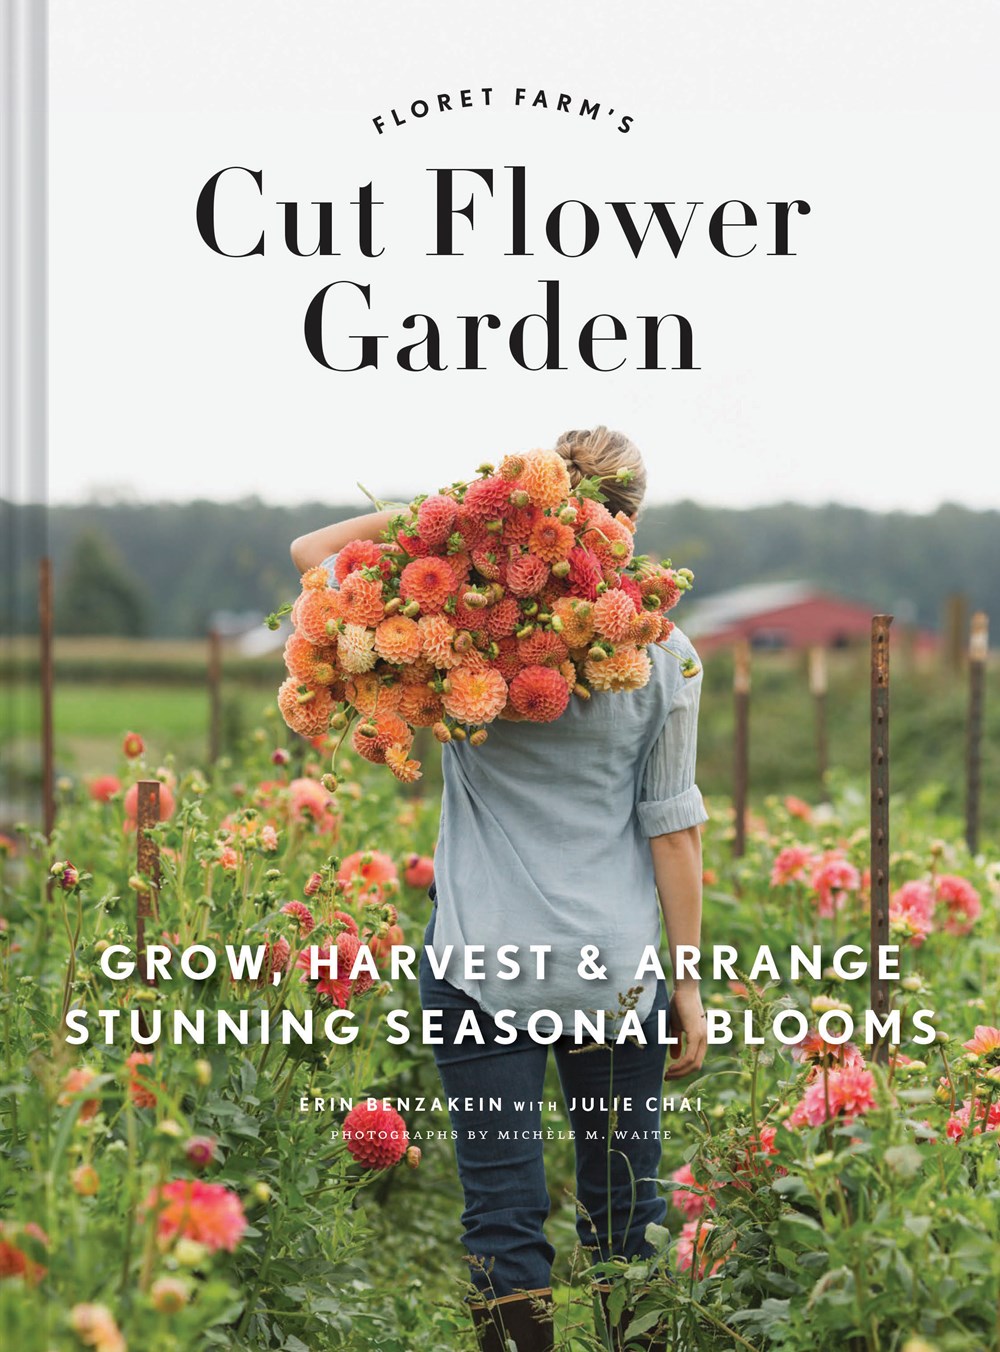 Watching ‘Growing Floret’? | Books for Viewers